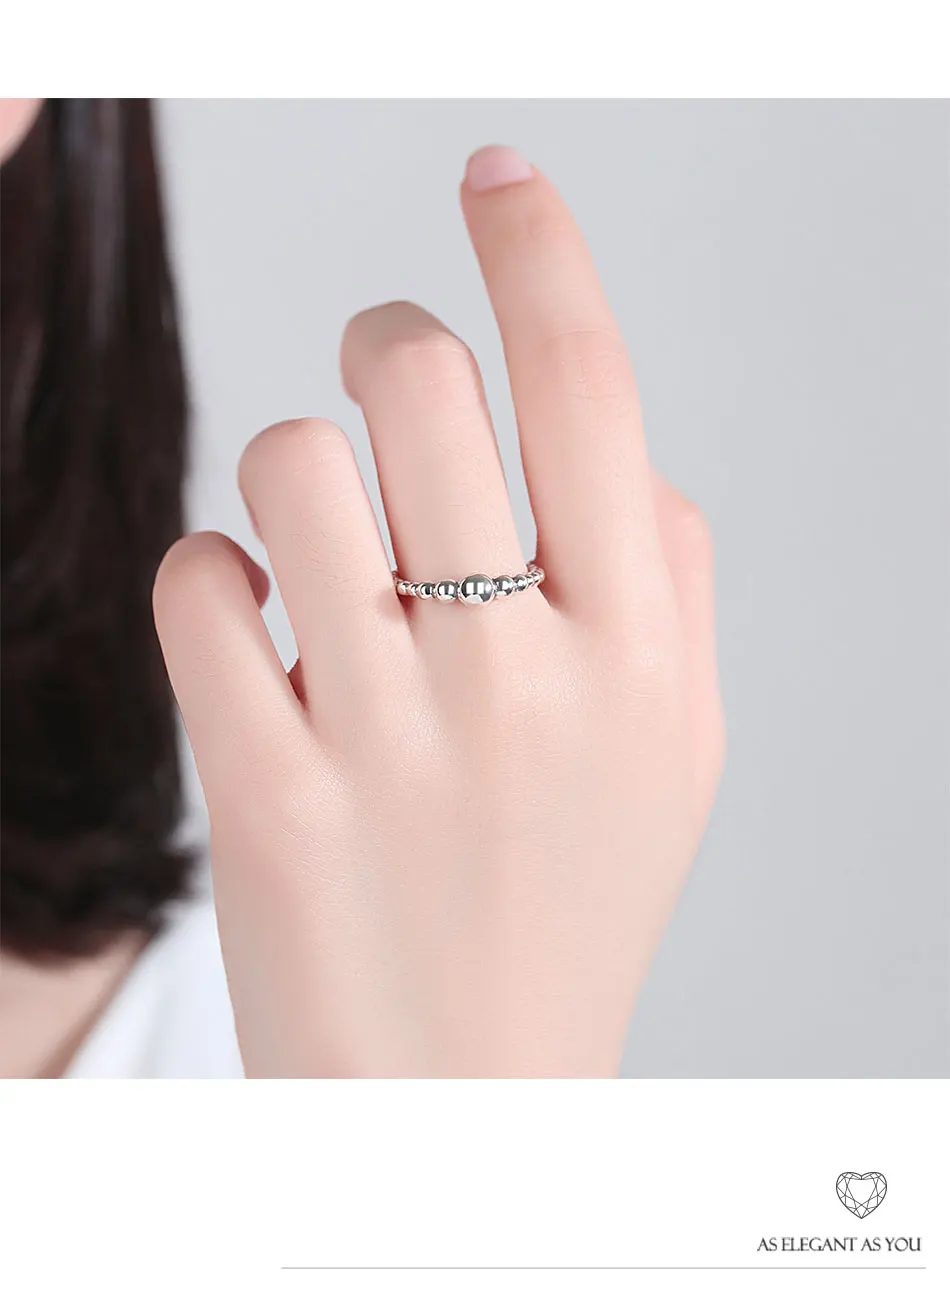 BELAWANG Authentic 925 Sterling Silver Stackable Round Geometric Finger Rings for Women Wedding Original Silver Jewelry